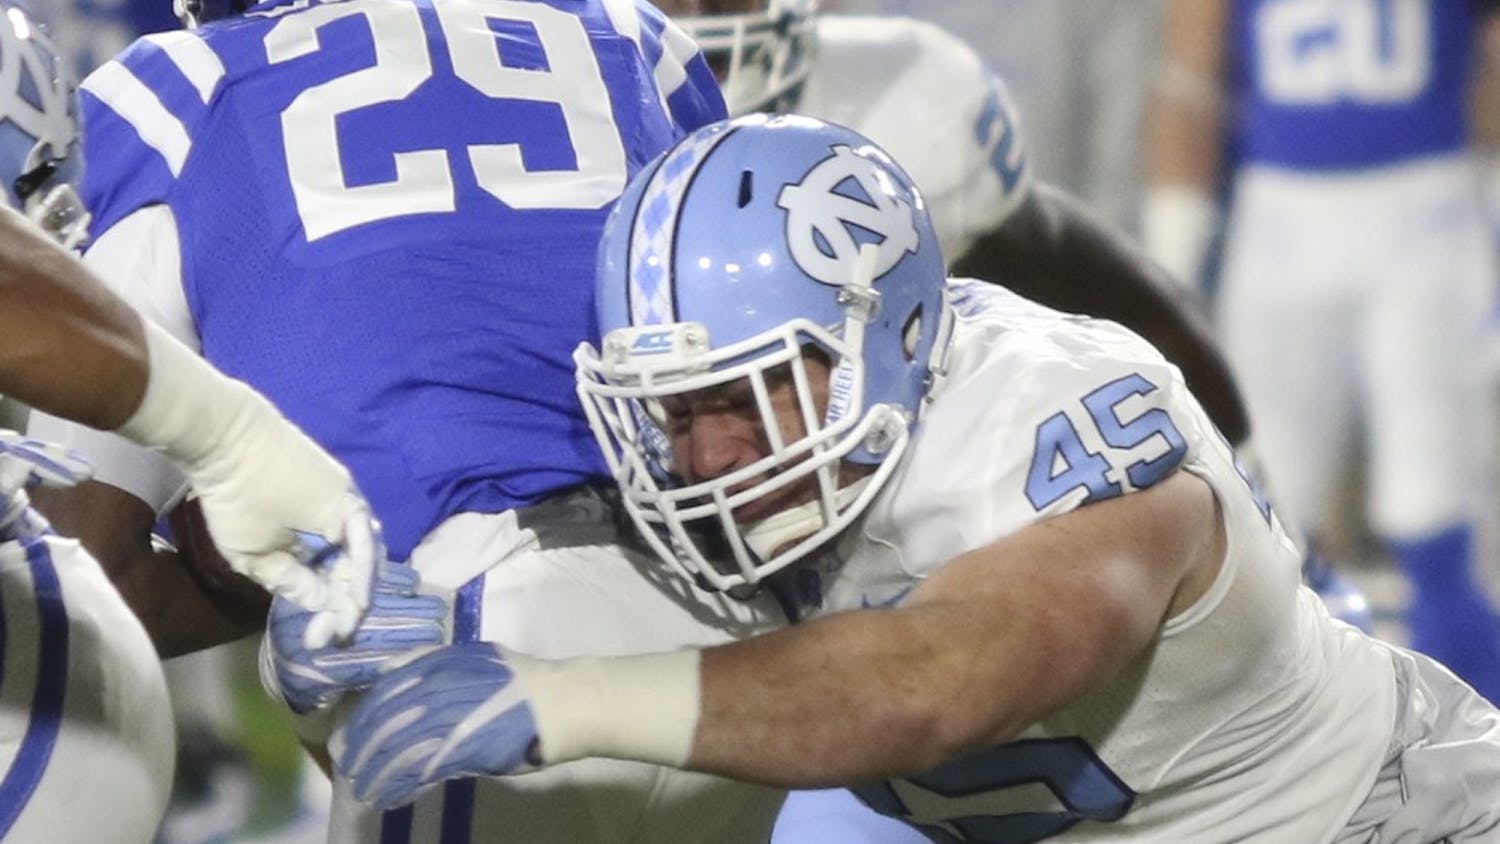 UNC defensive end Mikey Bart (45) makes a tackle against Duke in Durham last Thursday.